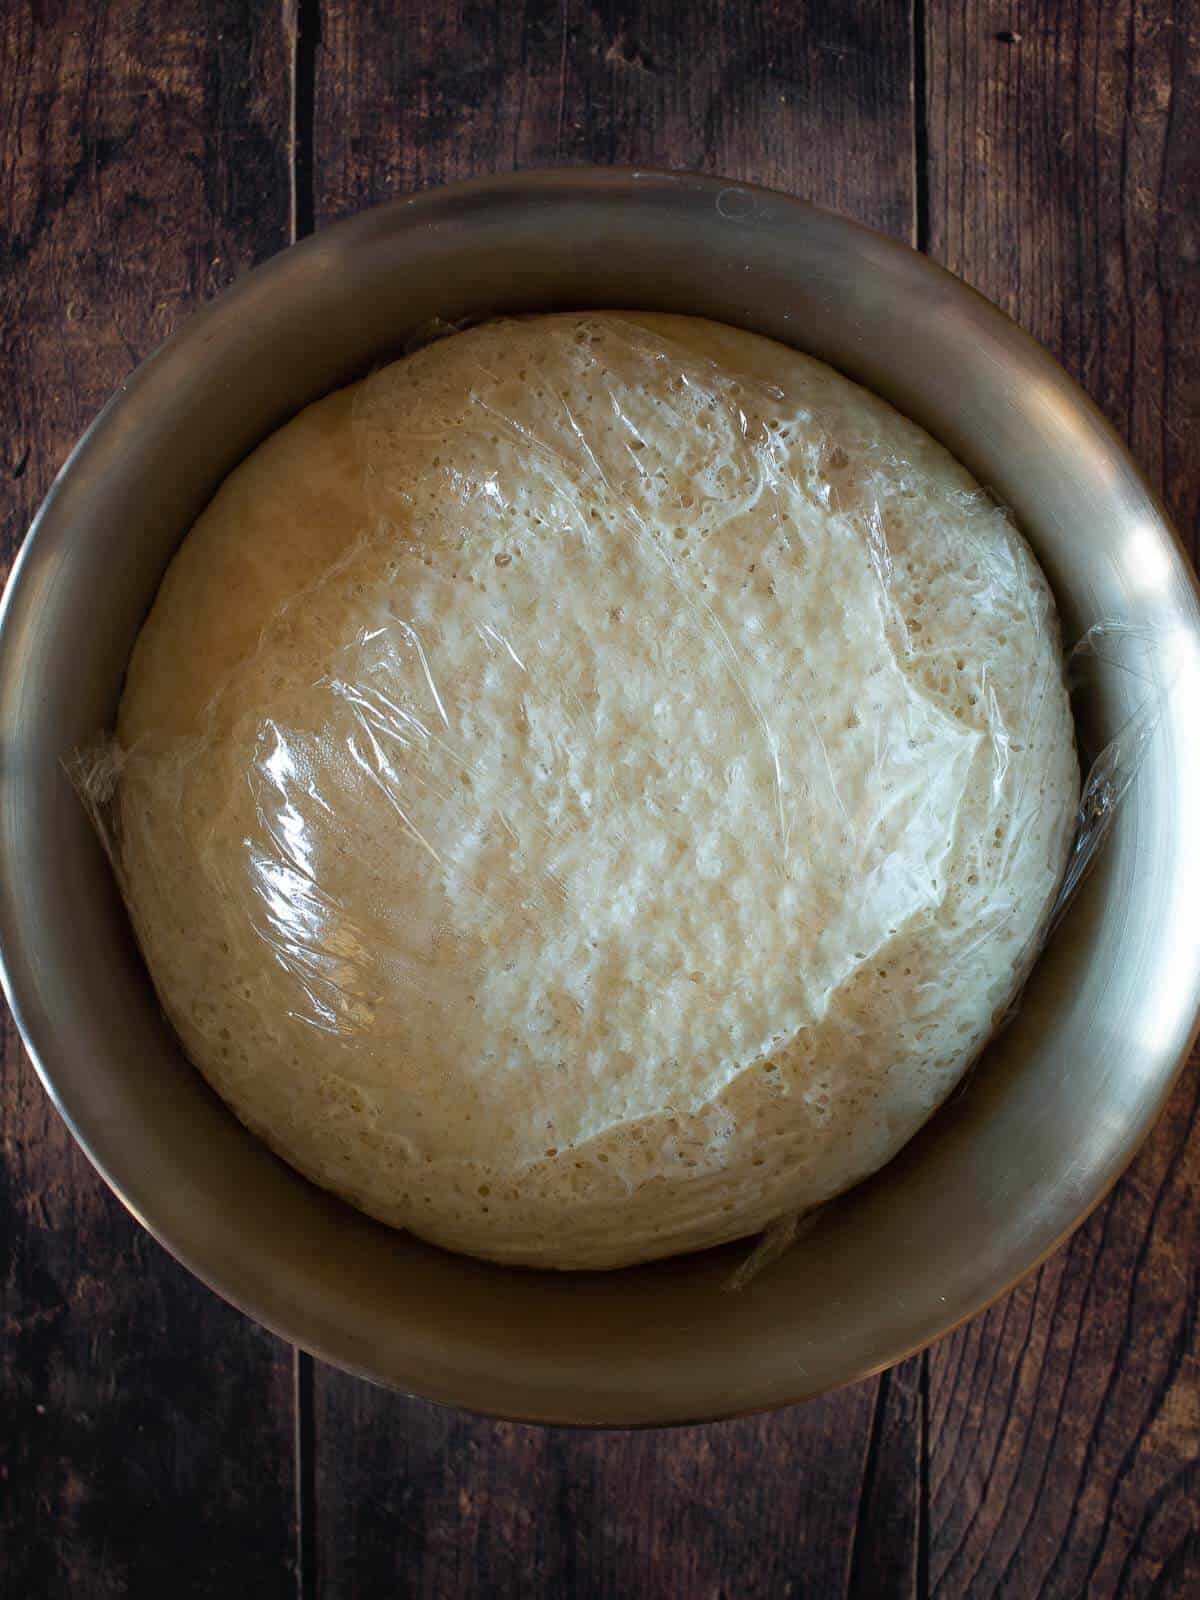 vegan pizza dough after rising with plastic wrap on top